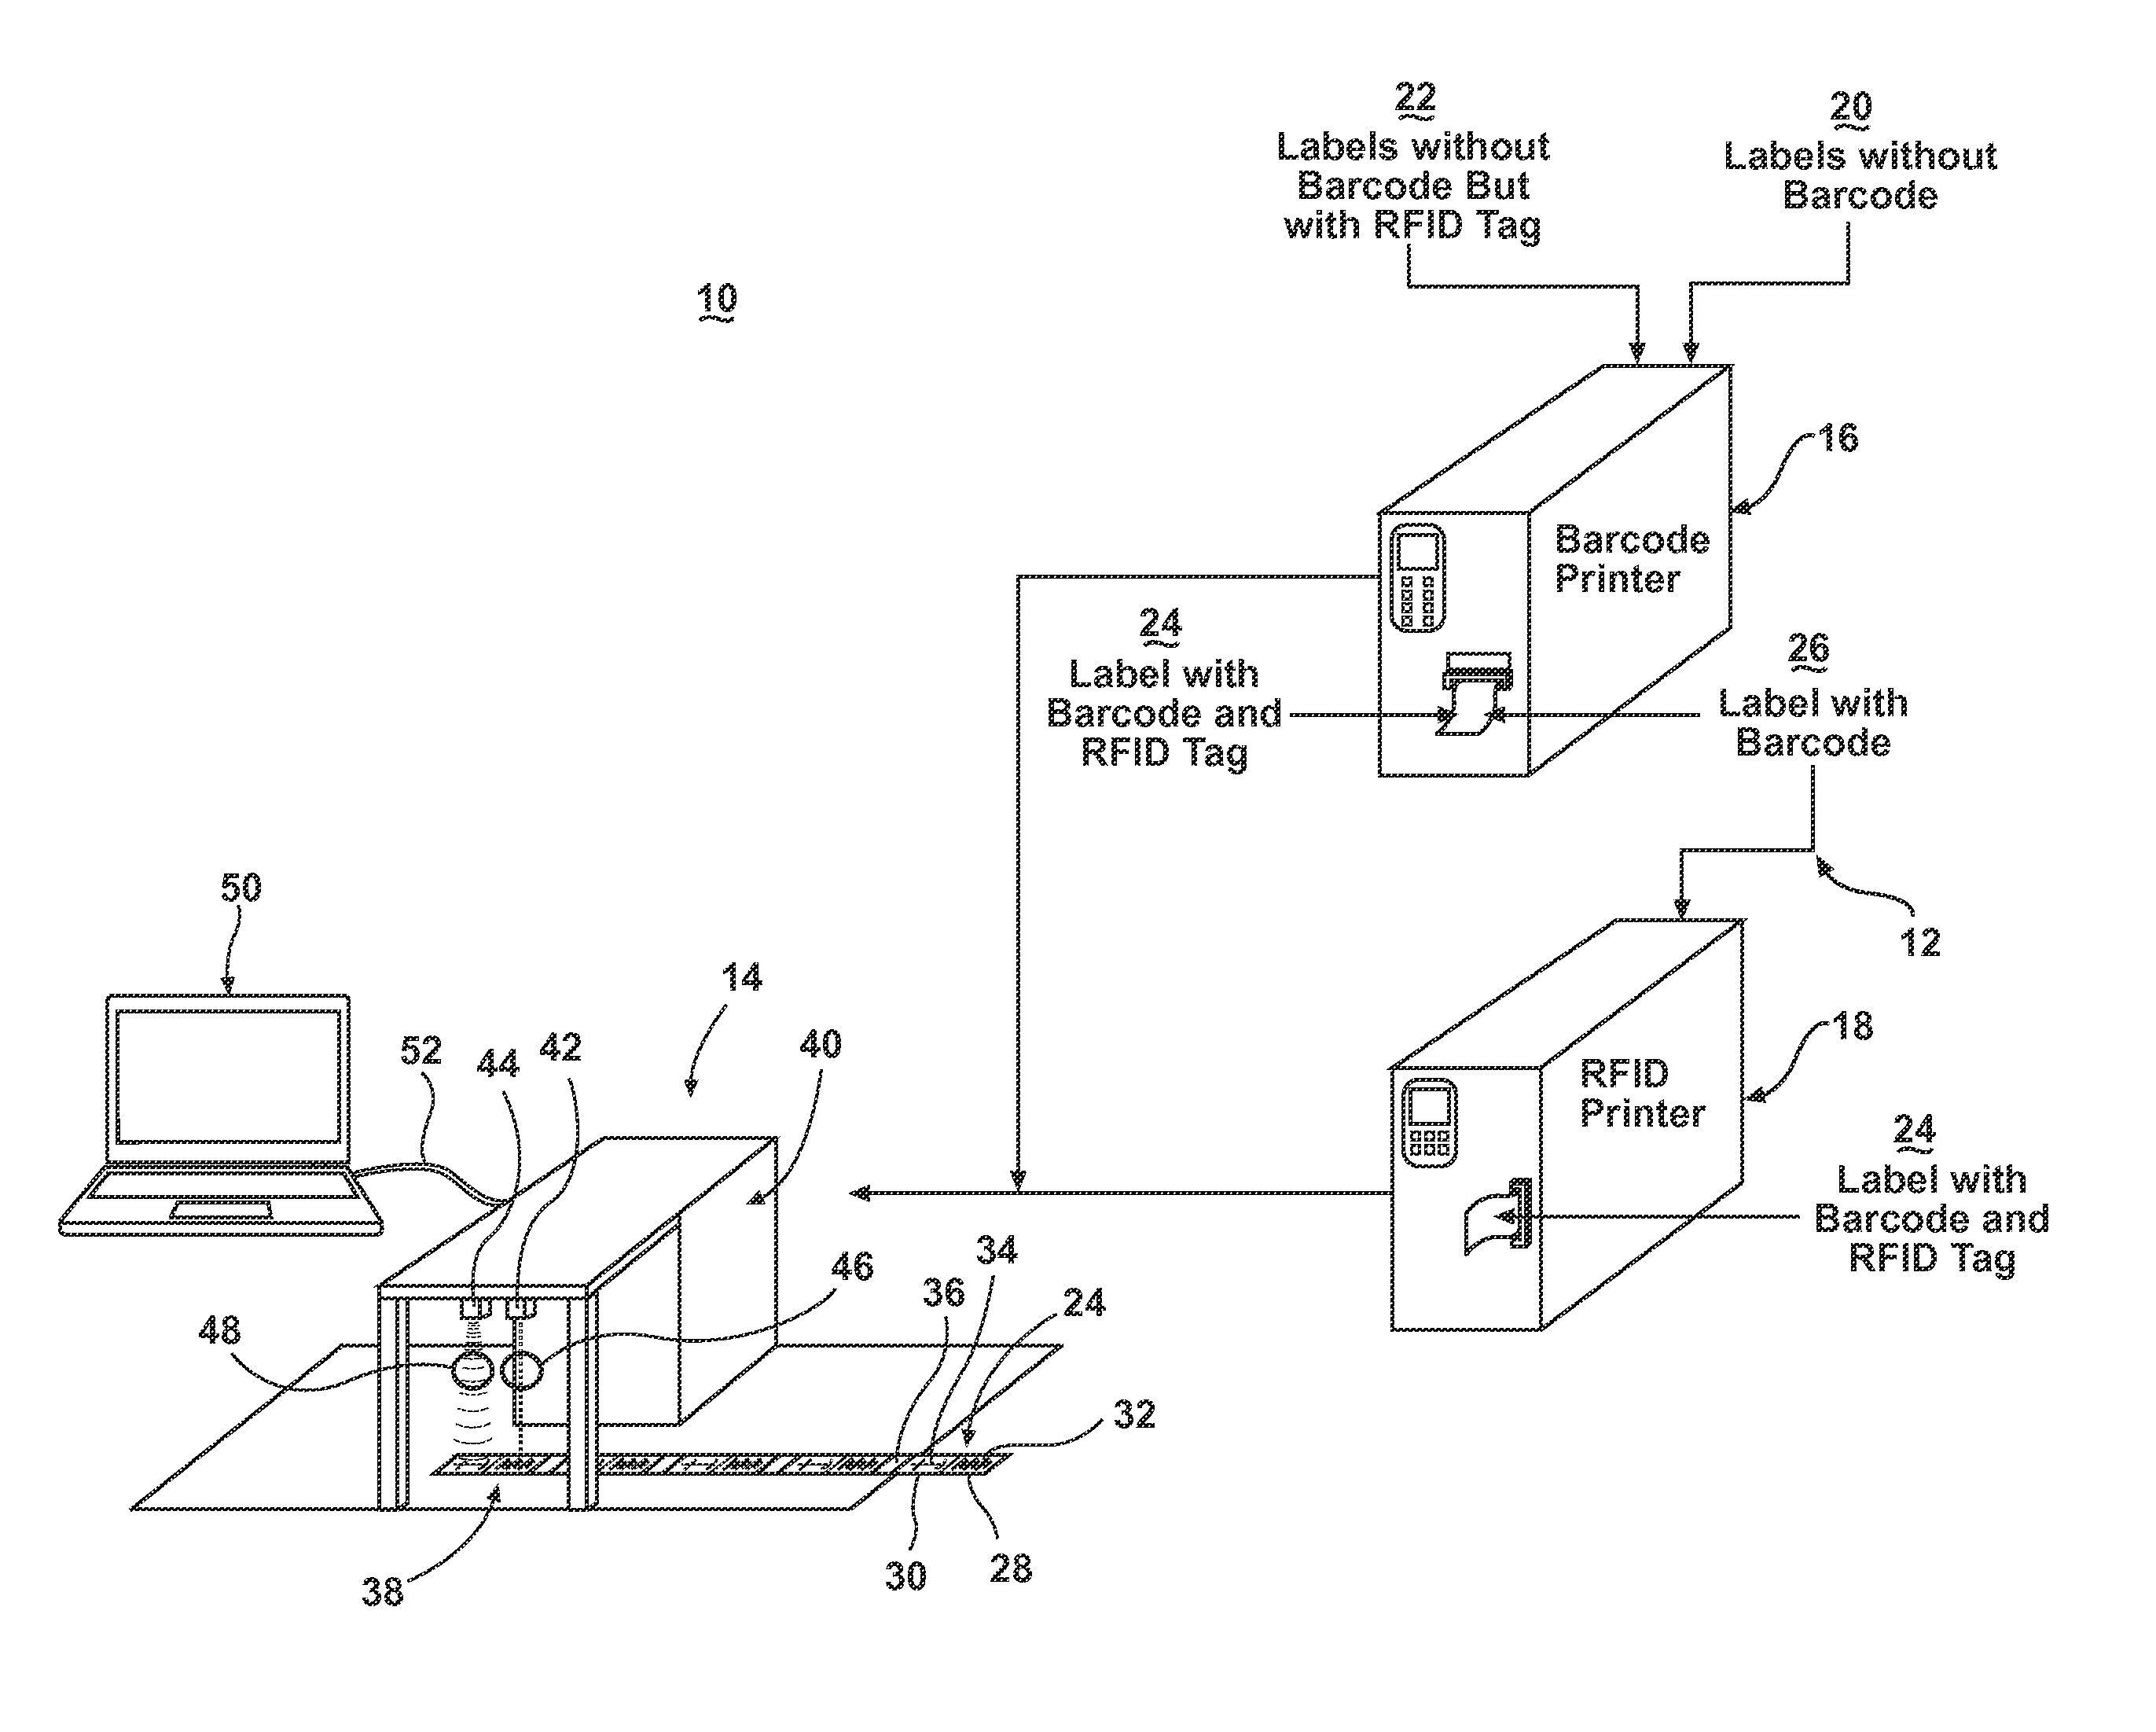 System for associating RFID tag with upc code, and validating associative encoding of same